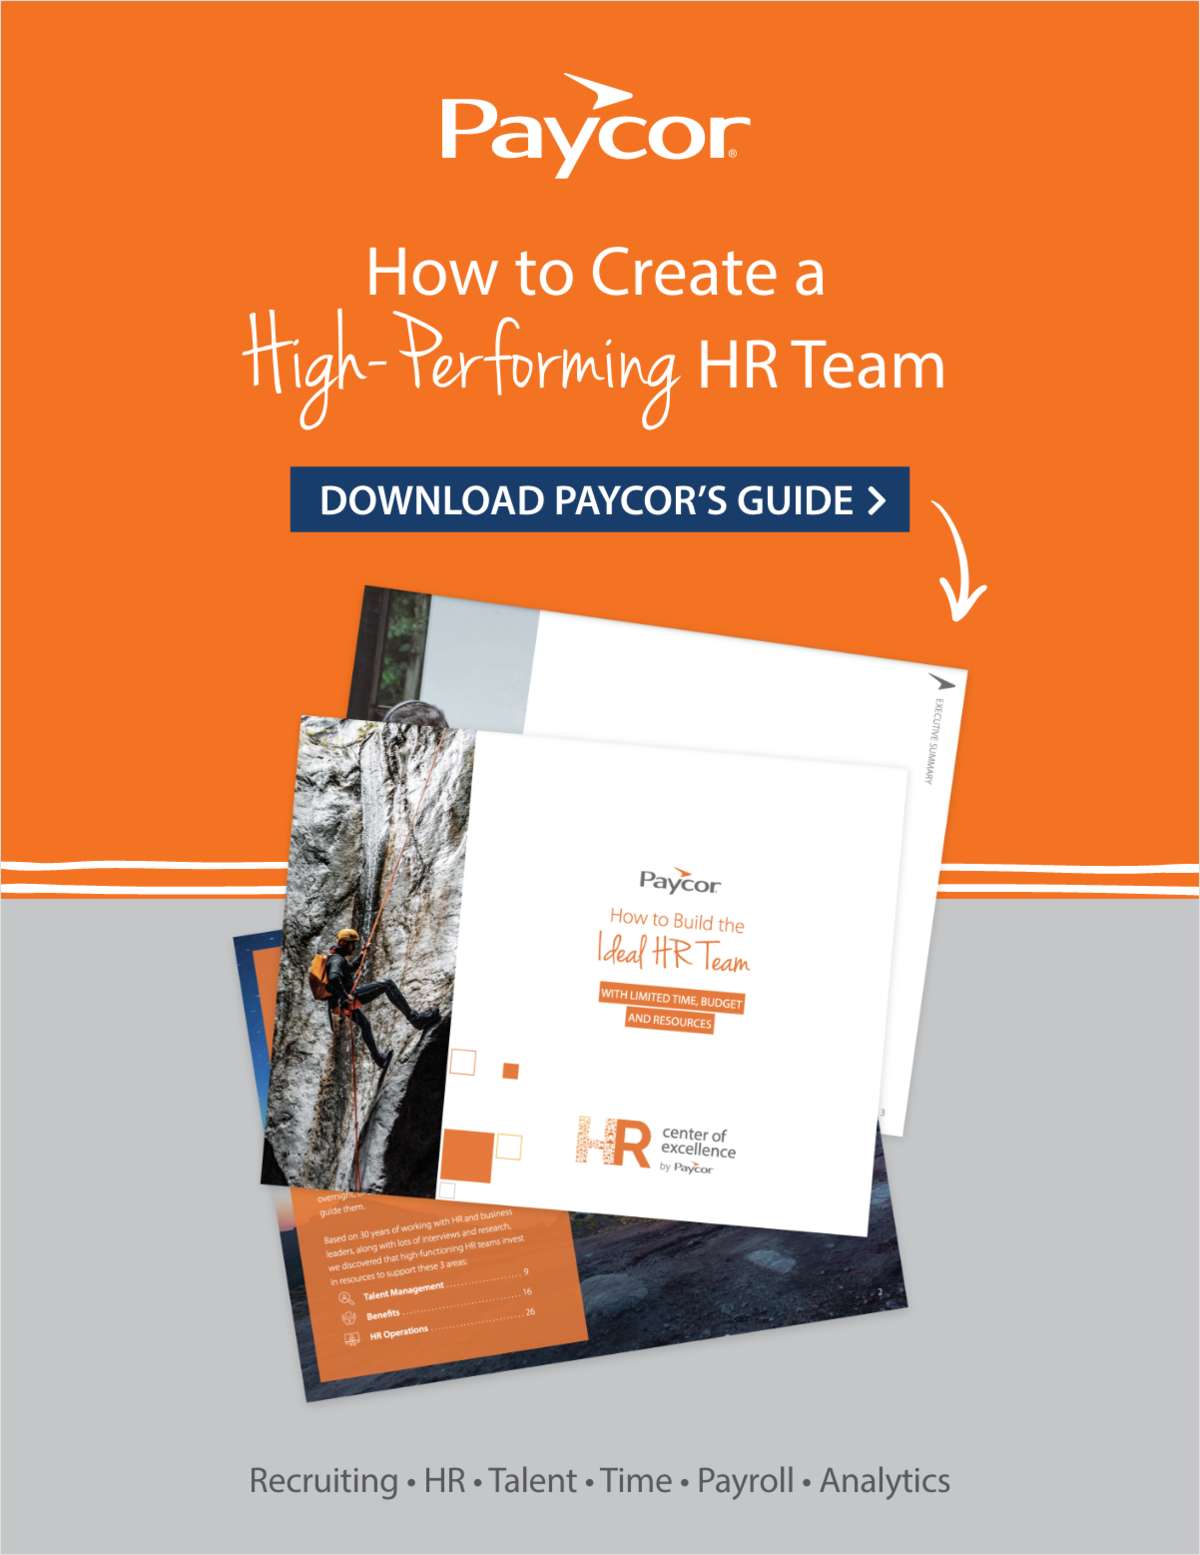 How to Create a High-Performing HR Team